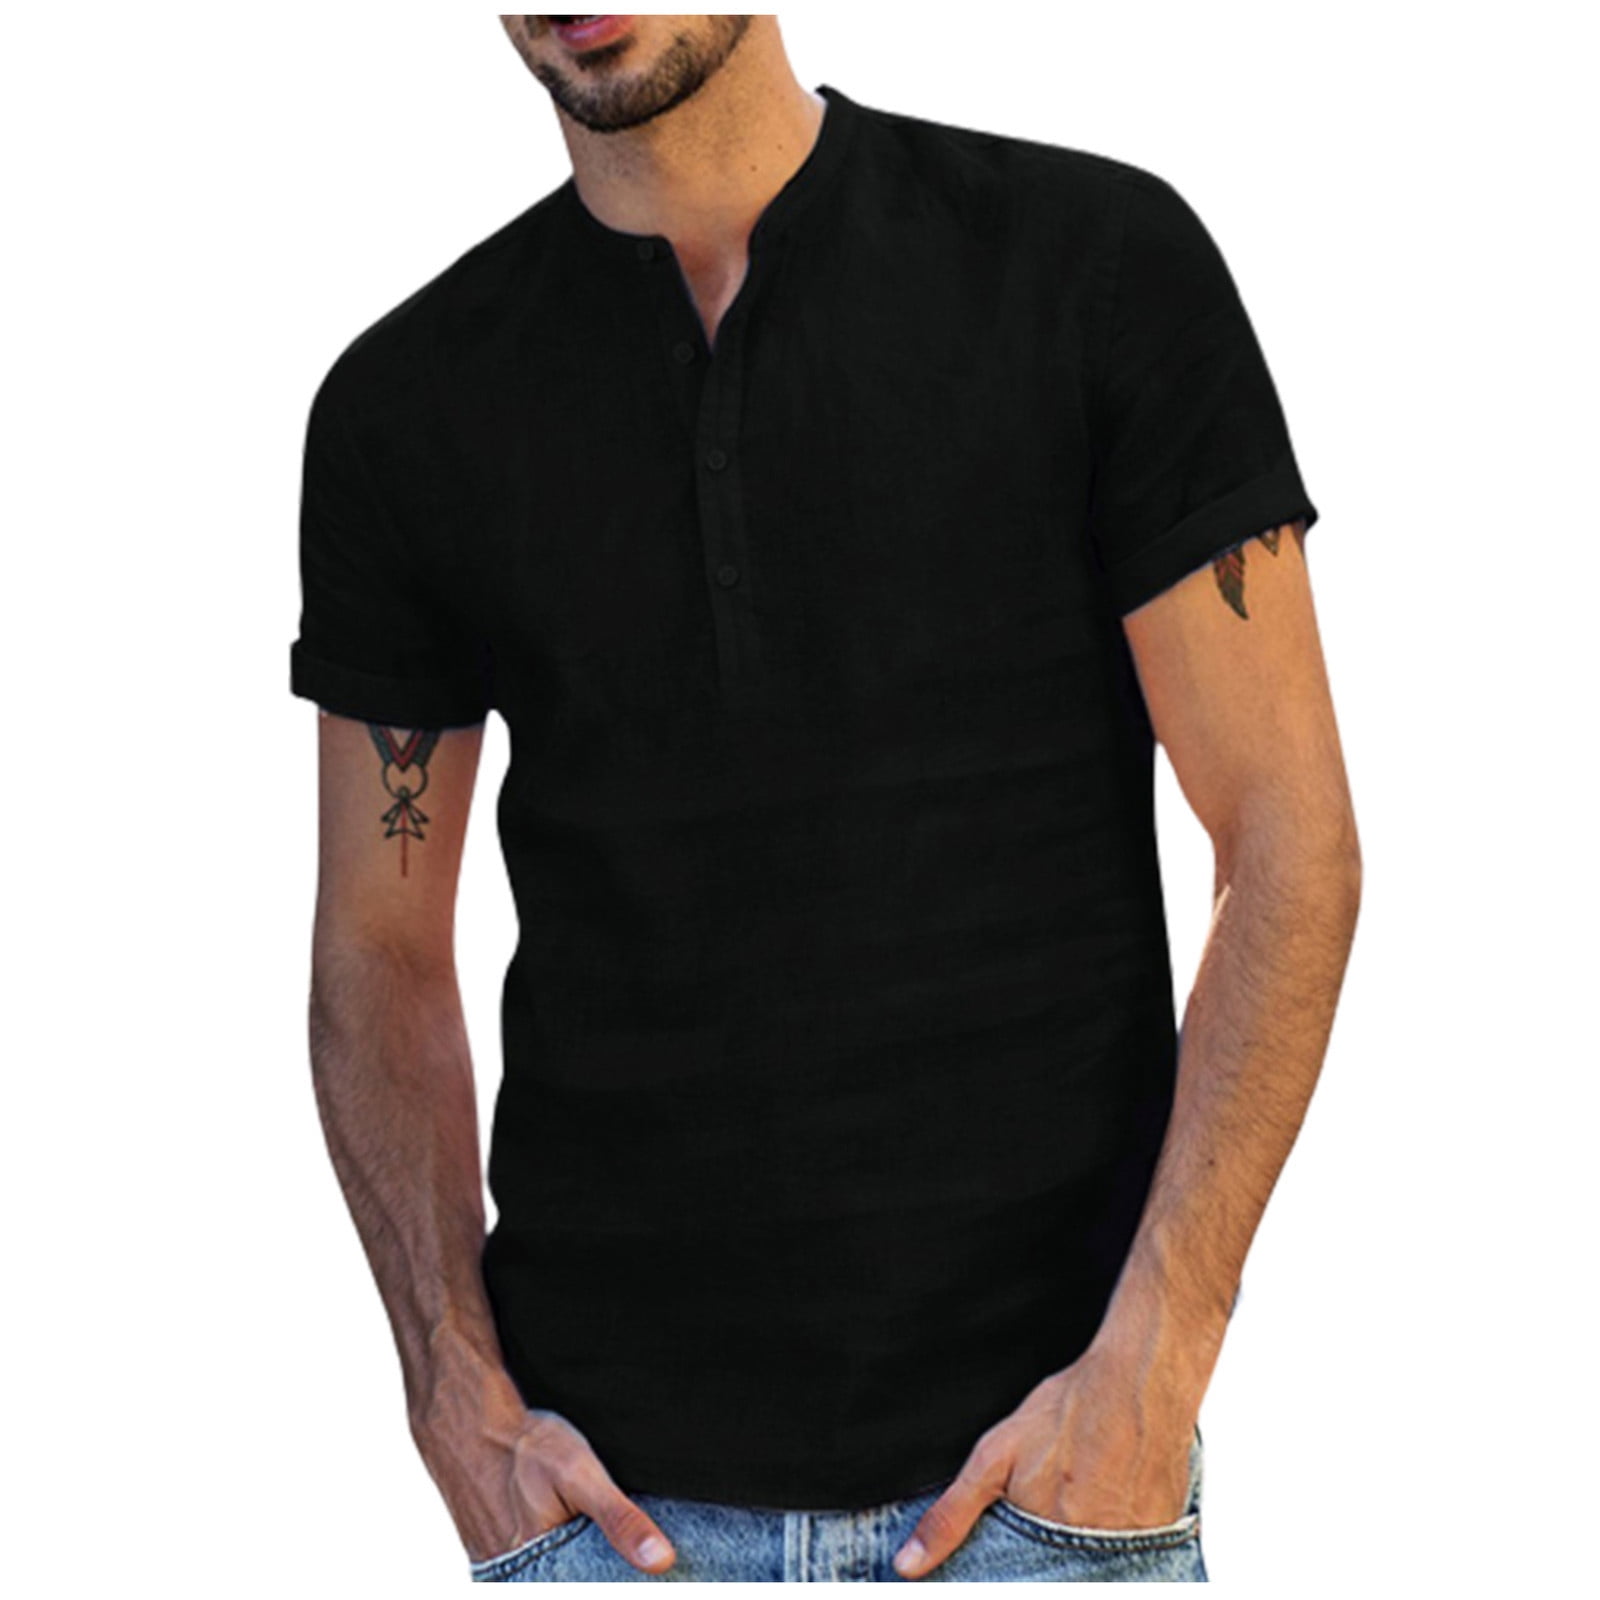 VSSSJ Cotton and Linen Shirts for Men Big and Tall Solid Color Short Sleeve  V-Neck T-Shirt Fashion Summer Moisture Wicking Pullover Tops Black XXXL